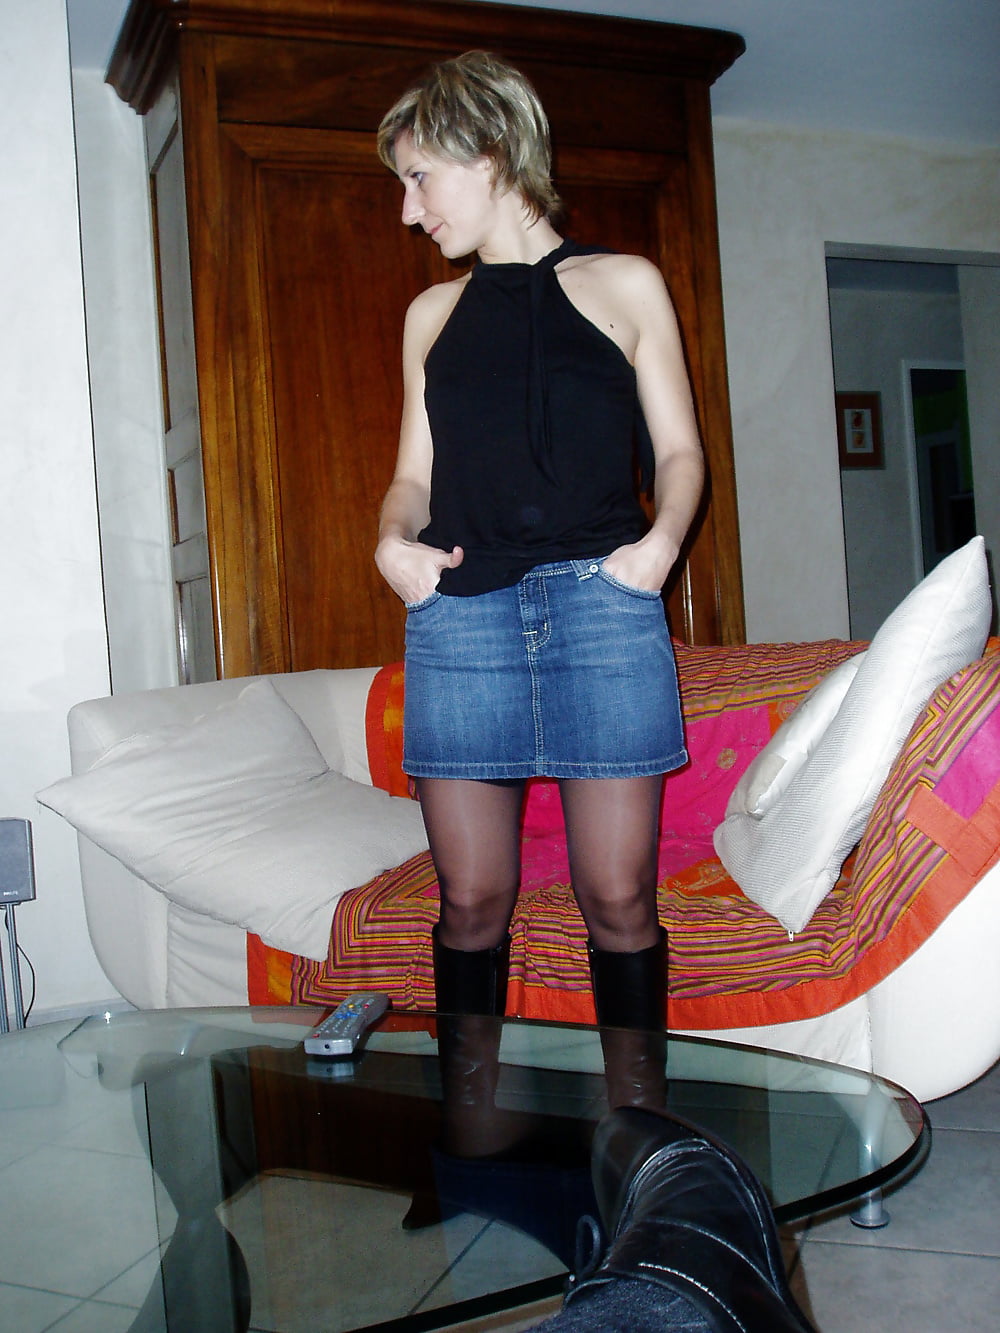 Sex Hot wife in jeans skirt image